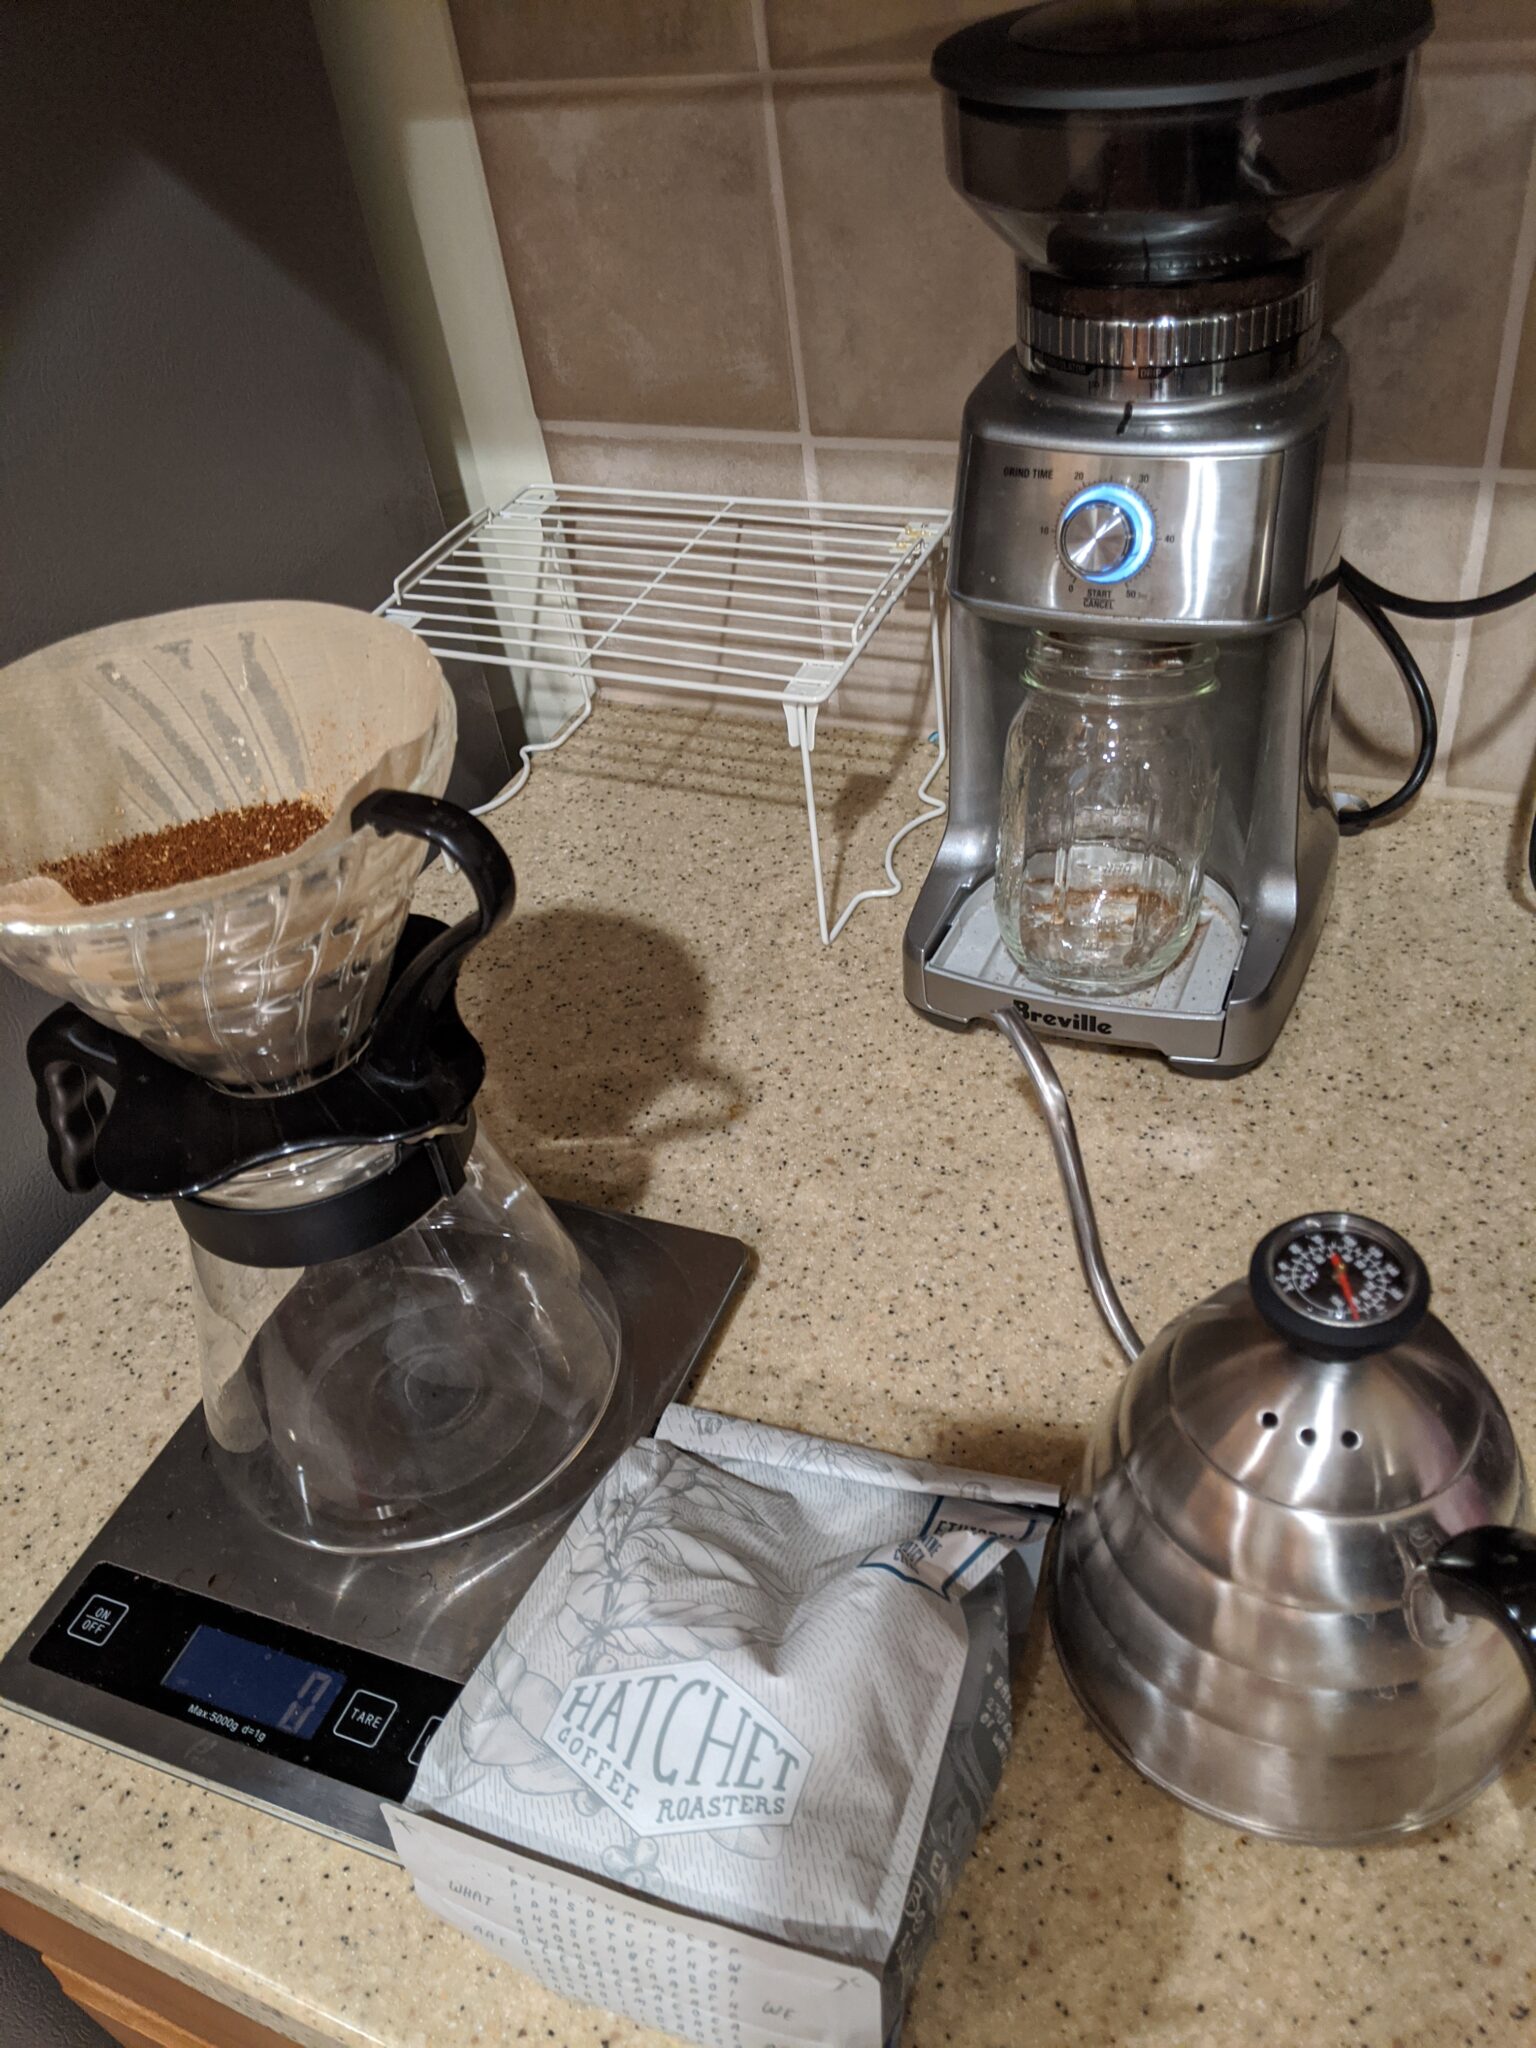 Coffee grinder, scale, kettle, and pour over device on counter.